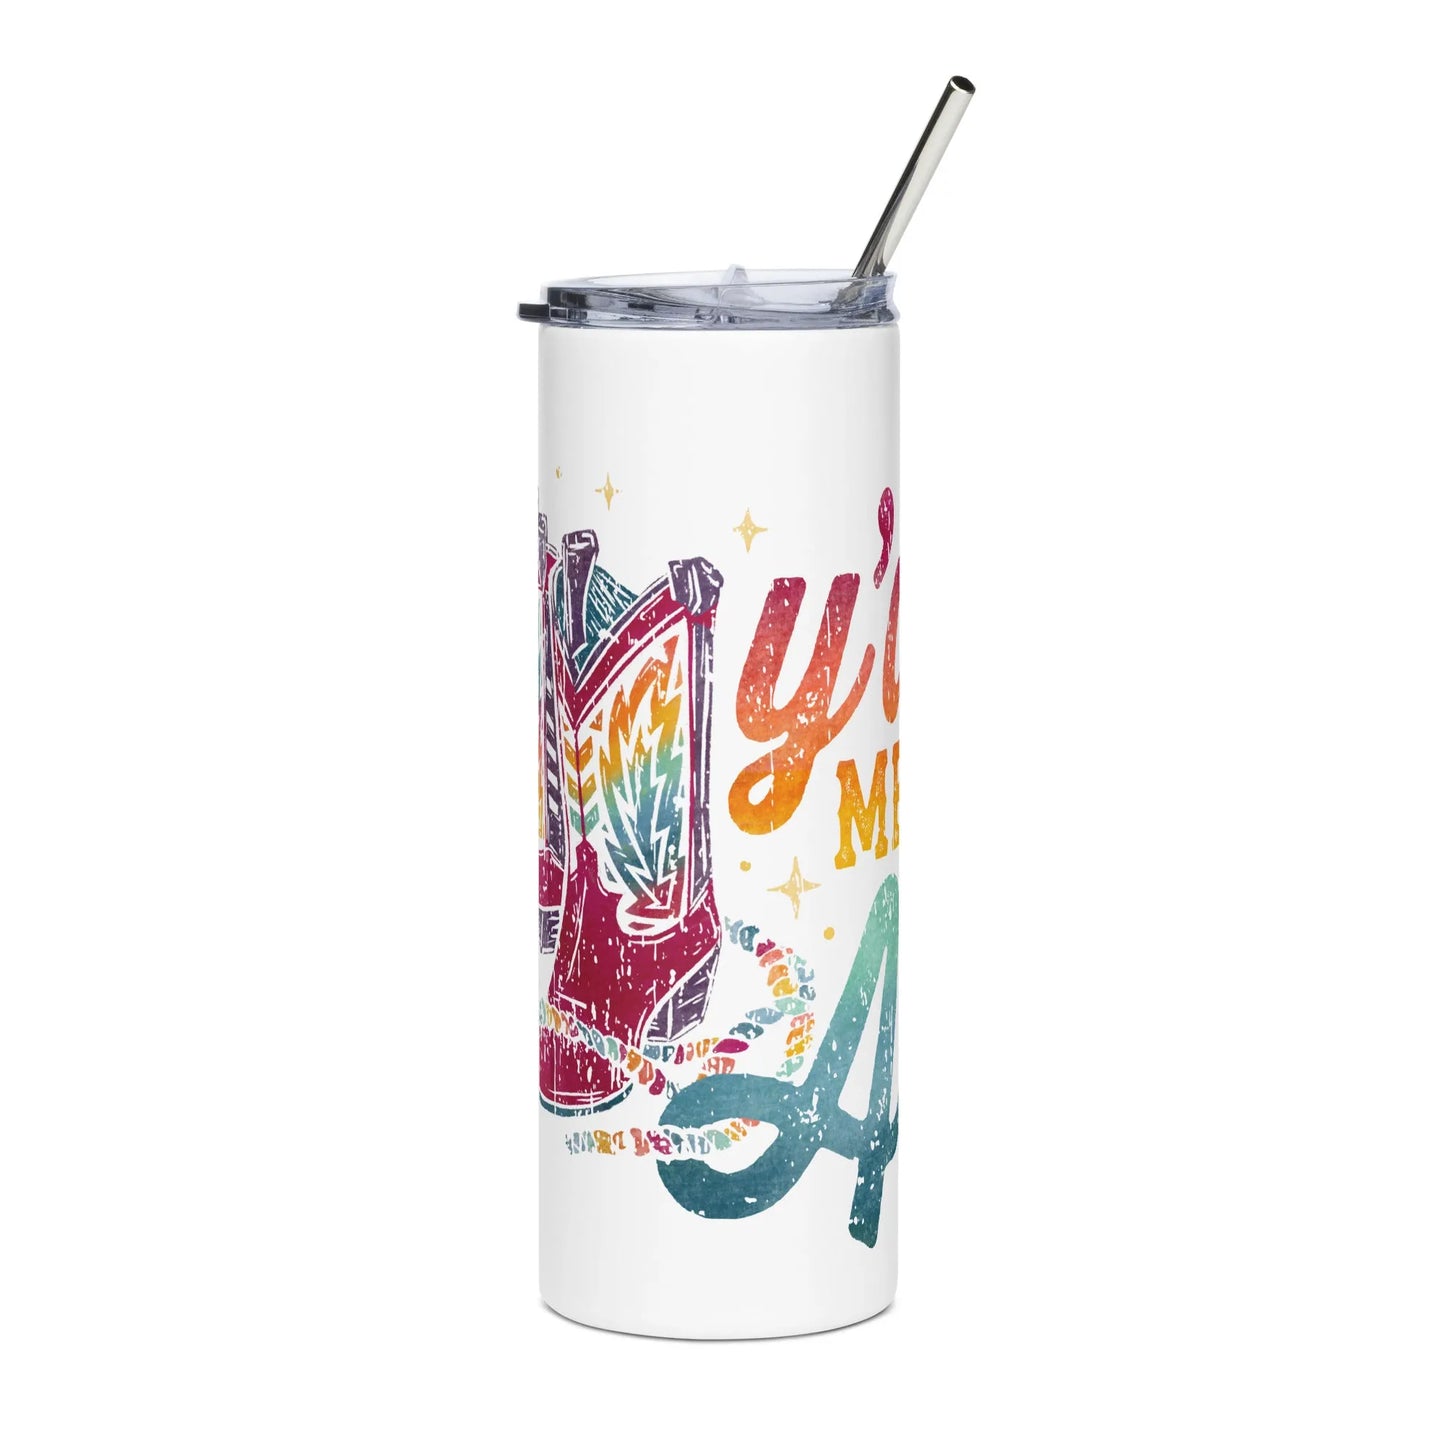 Y’all Means All Rainbow Boots Stainless Steel Tumbler